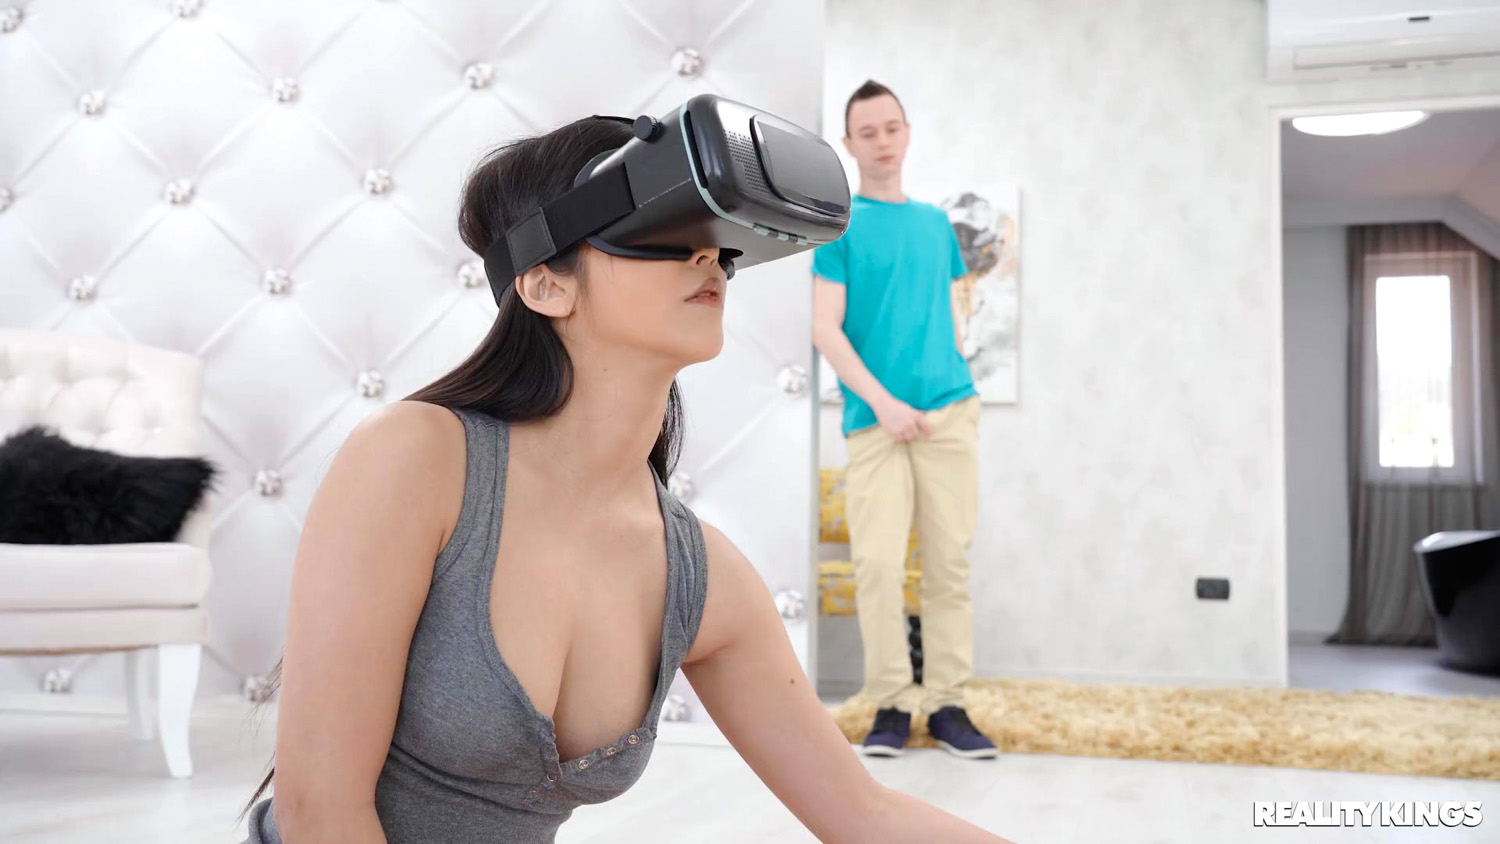 Sumire Mizukawa replaces that virtual reality cock with the real one